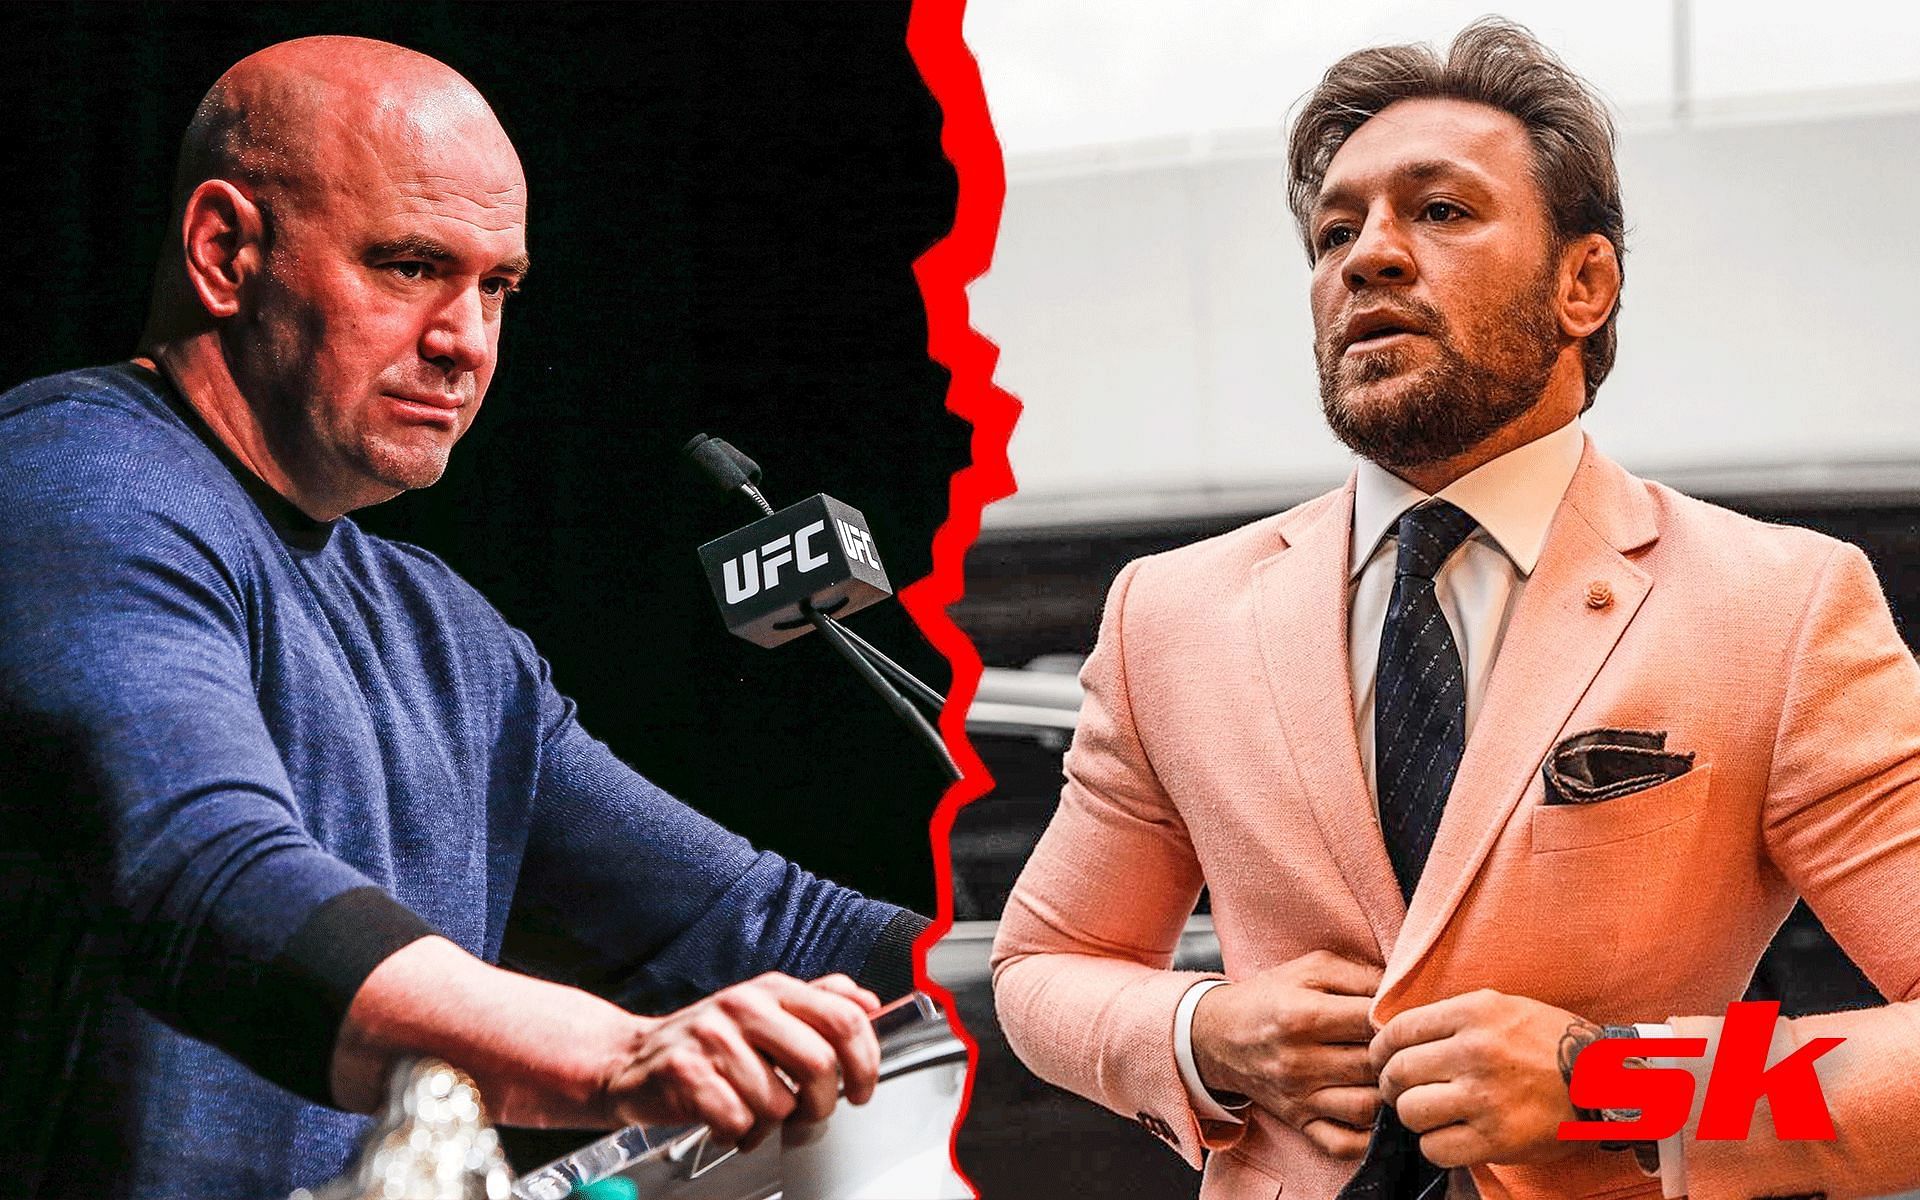 Conor McGregor (right) and Dana White (Left) [Images via: Getty and @thenotoriousmma on Instagram]